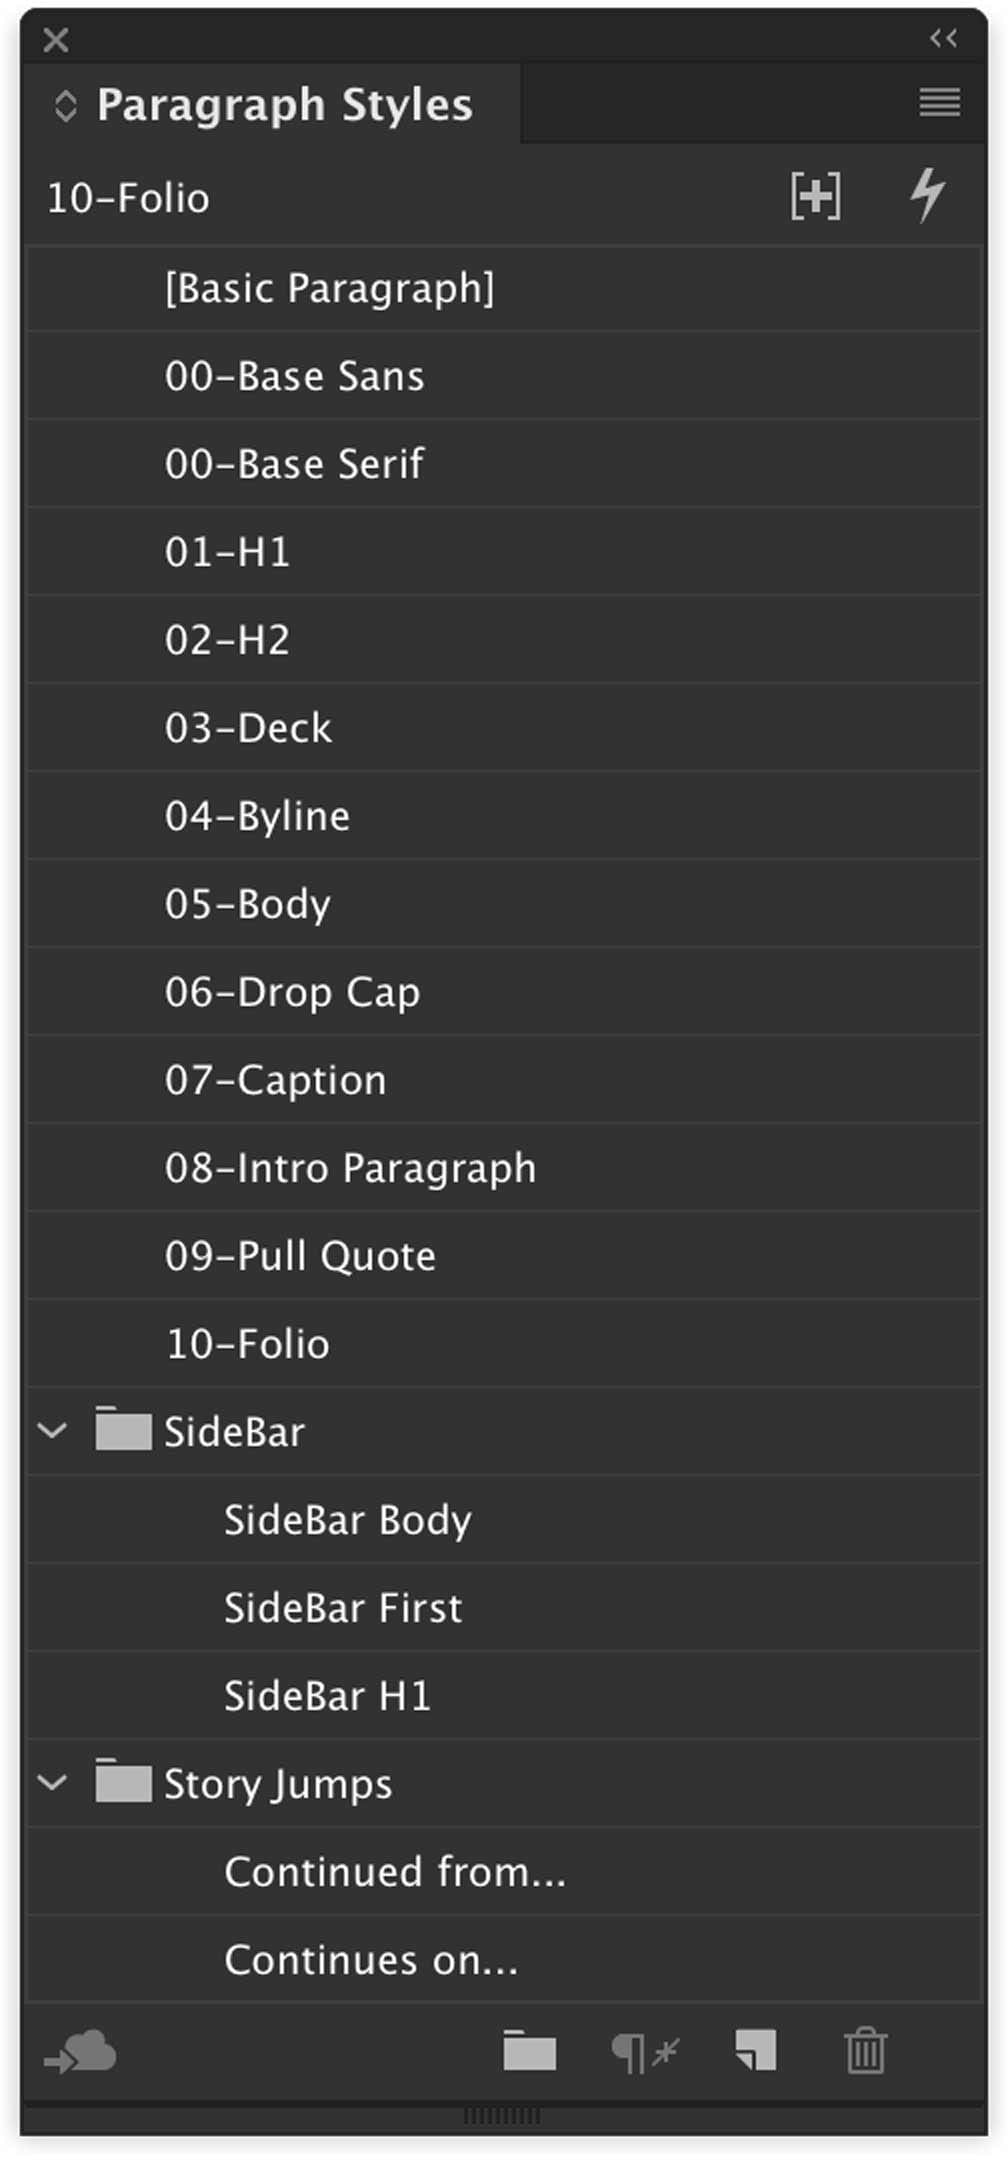 indesign-paragraph-styles